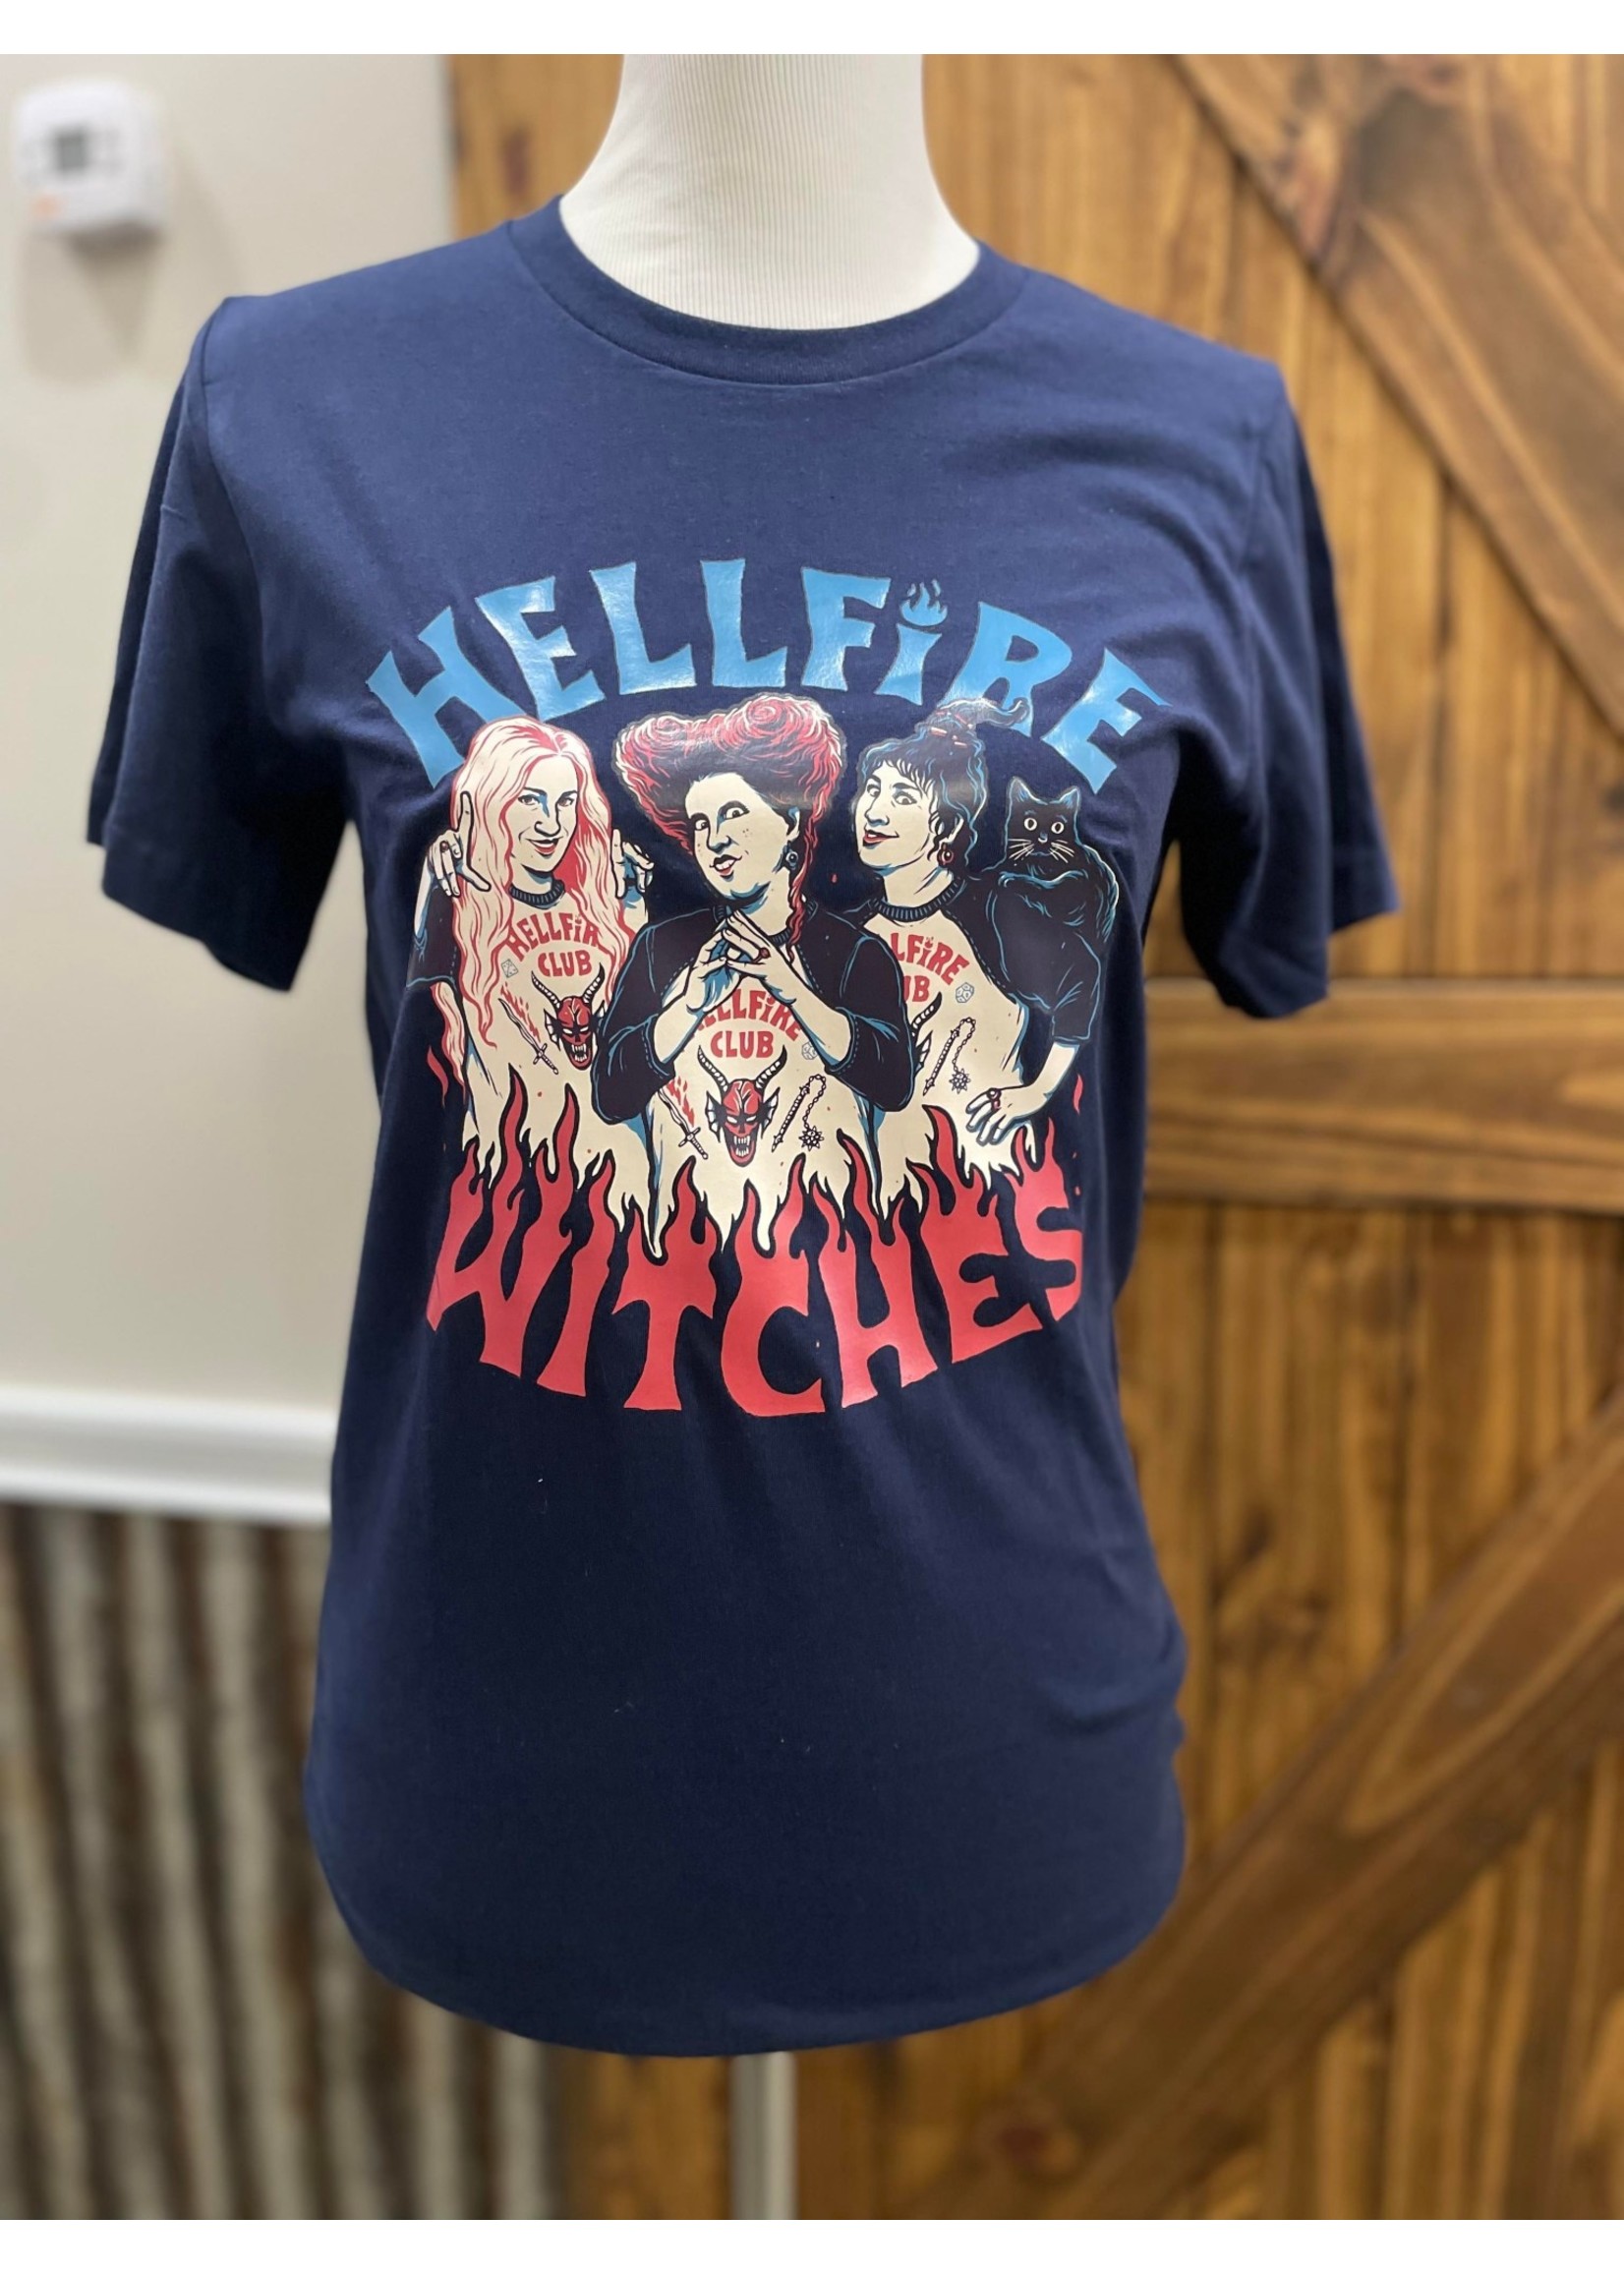 HellFire Witches Tee